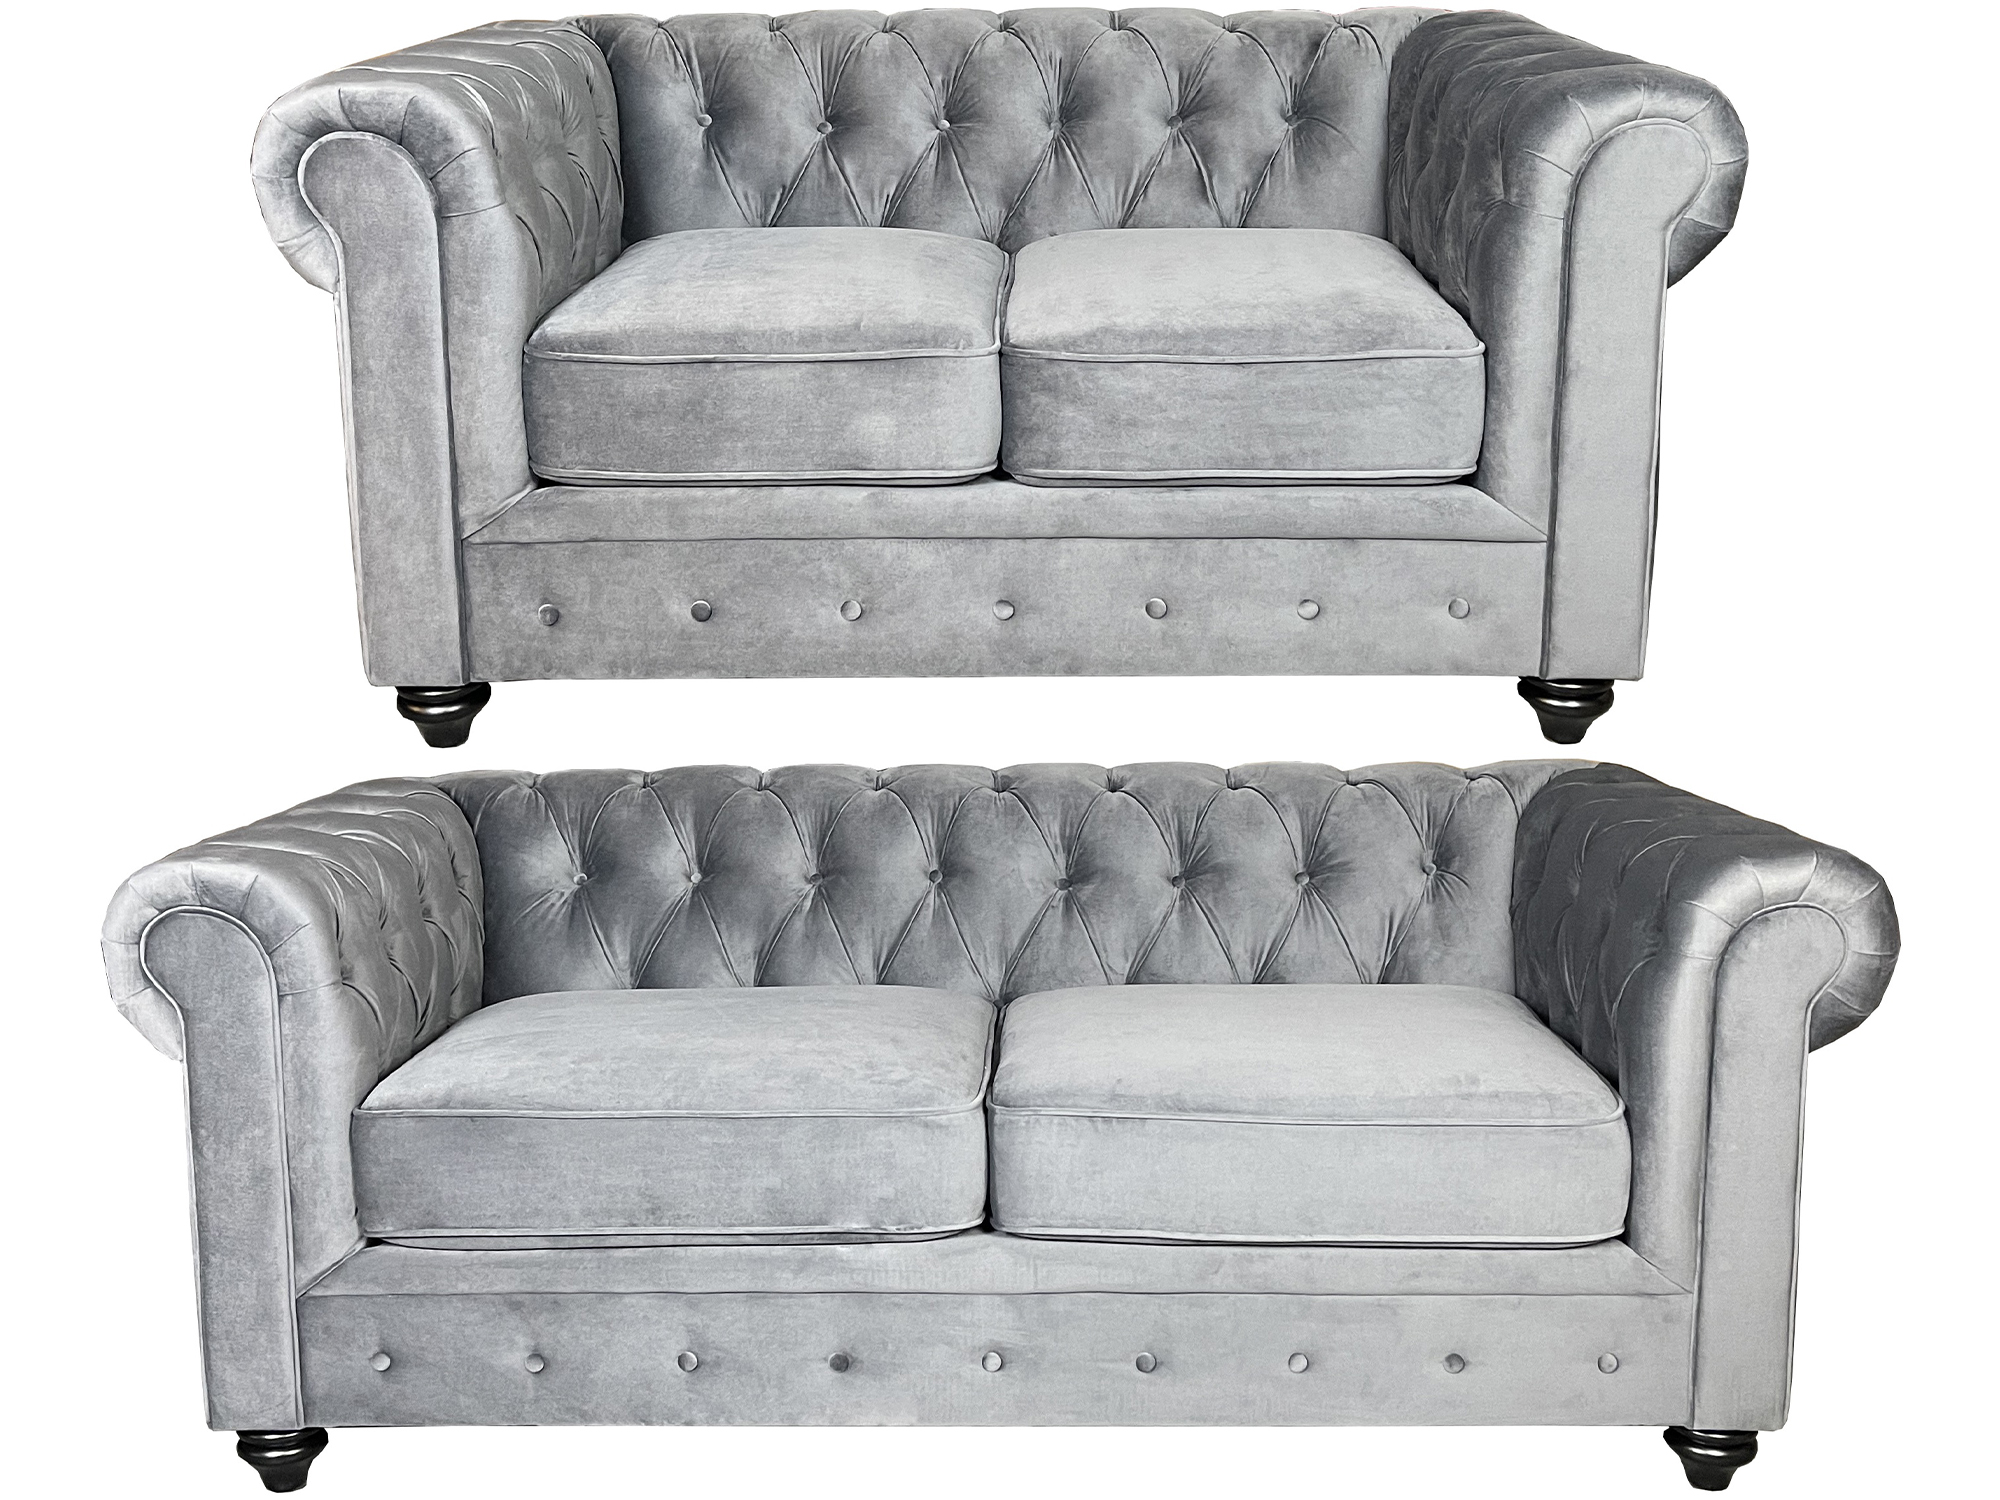 CHESTERFIELD 3+2 FABRIC